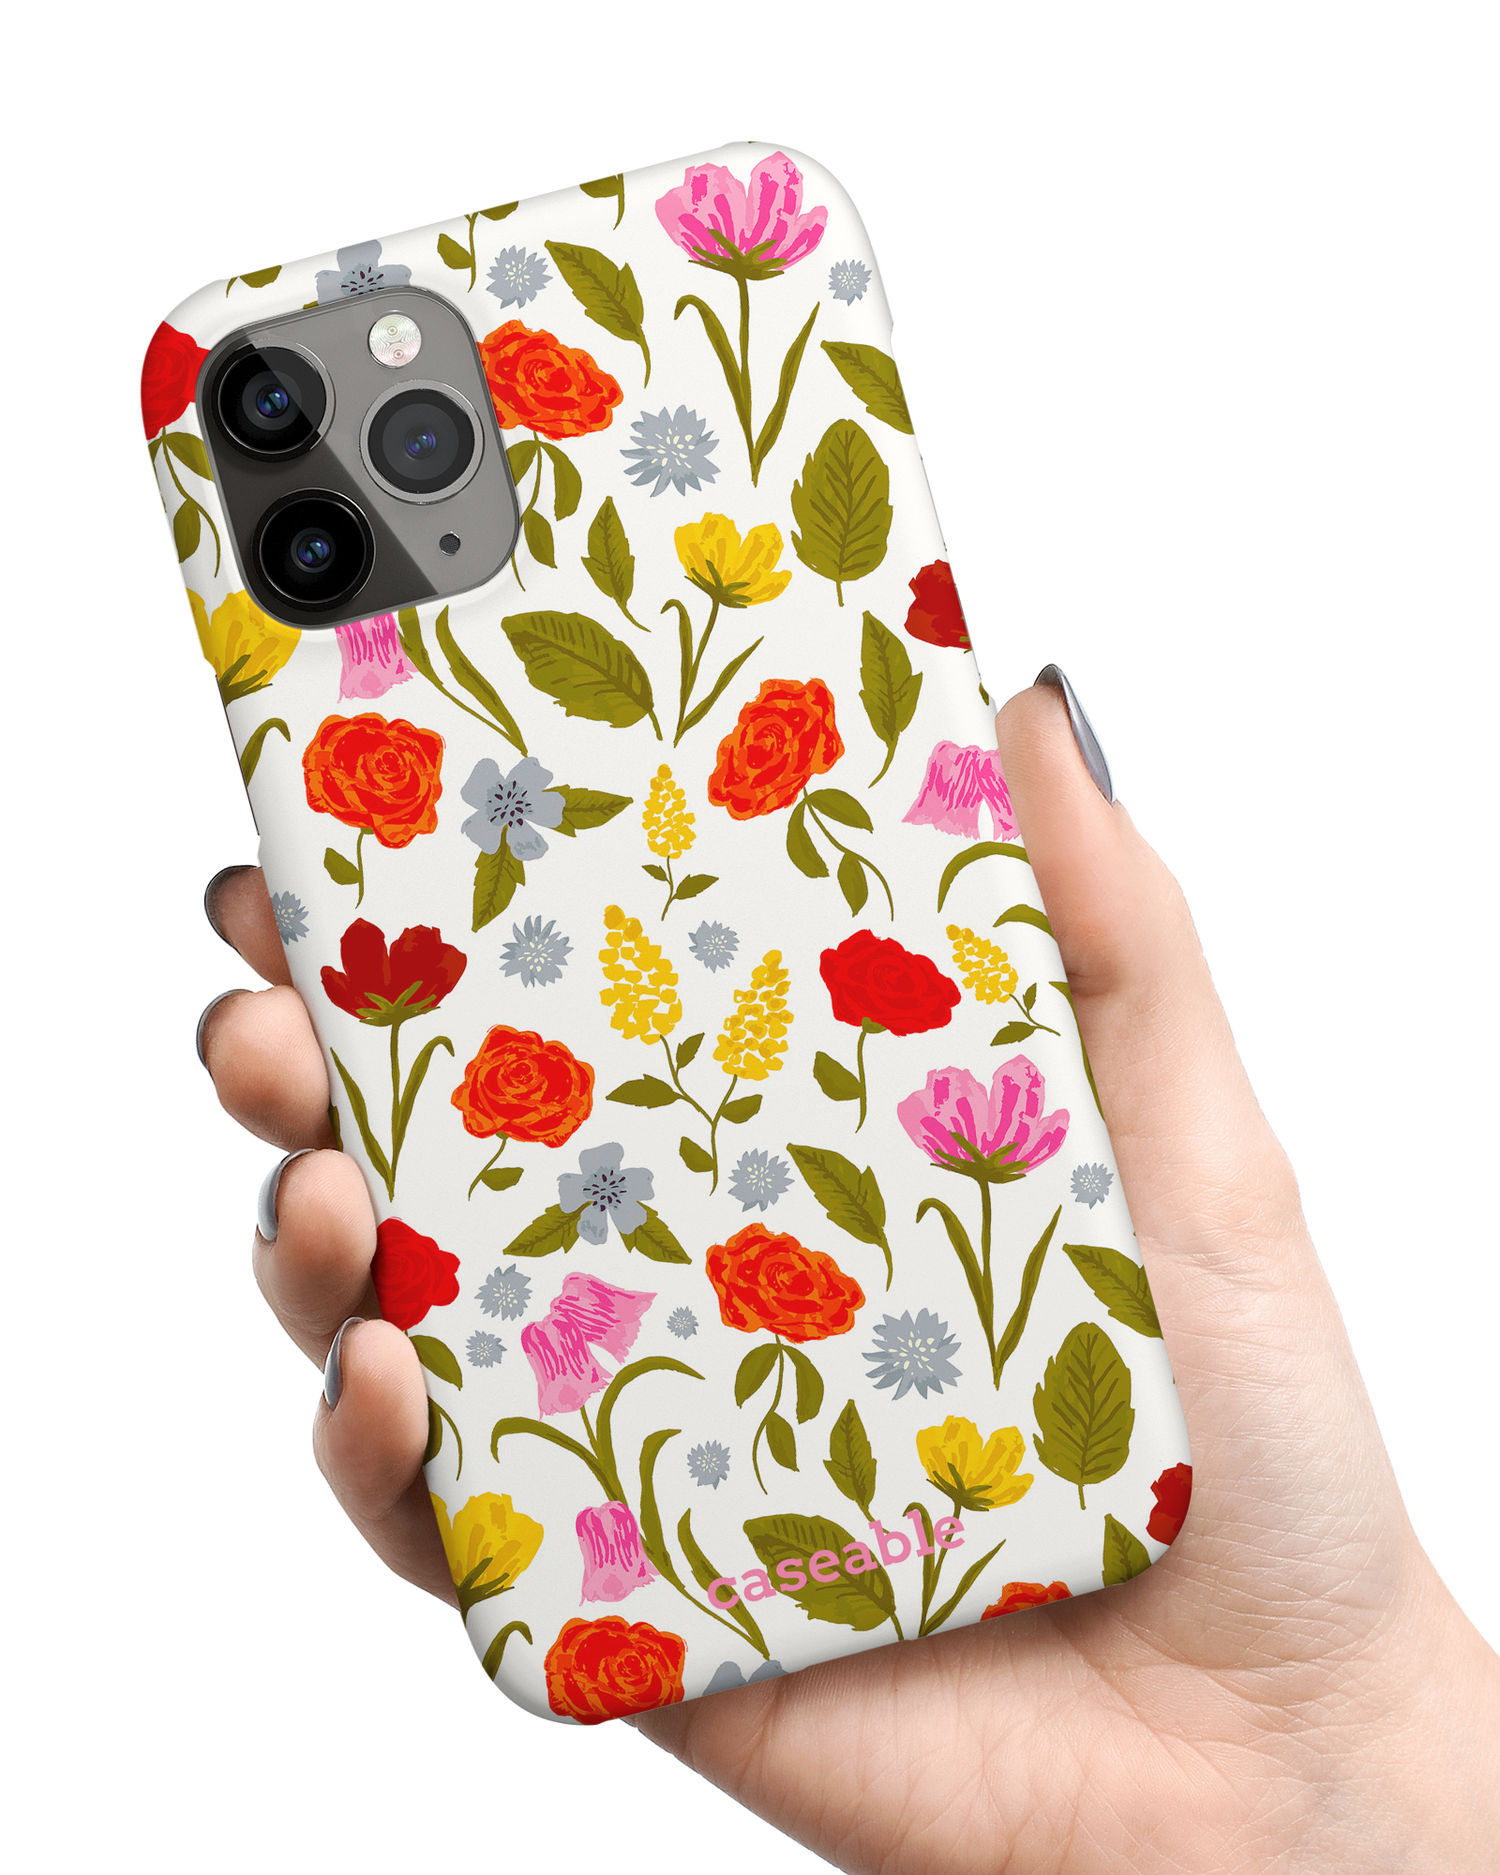 Botanical Beauties Hard Shell Phone Case Apple iPhone 11 Pro held in hand